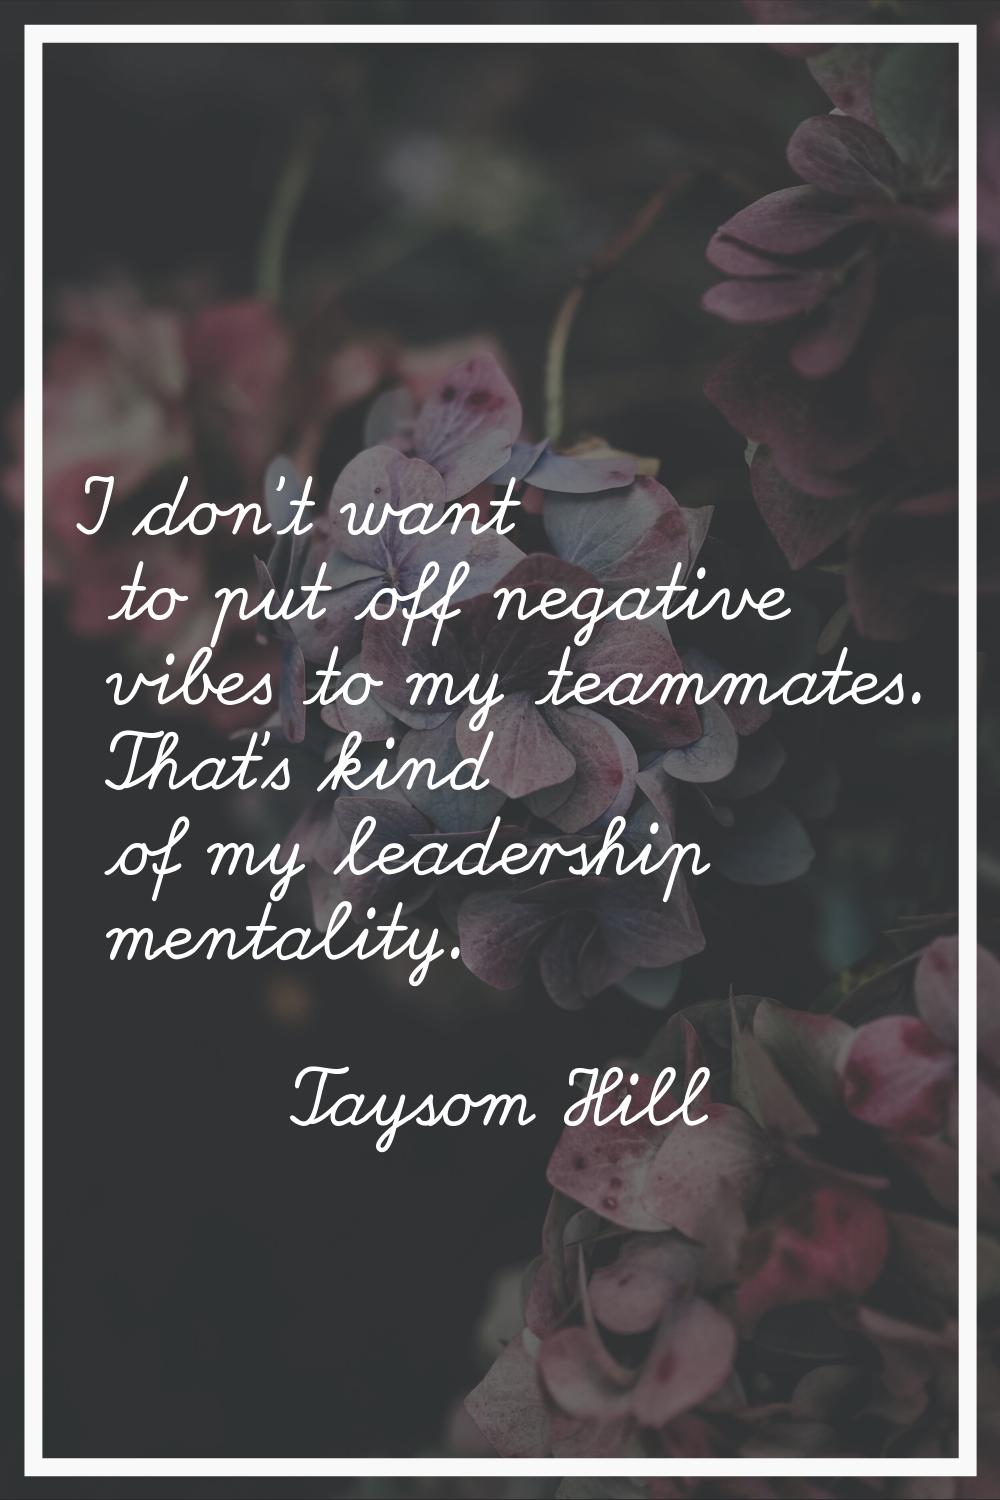 I don't want to put off negative vibes to my teammates. That's kind of my leadership mentality.